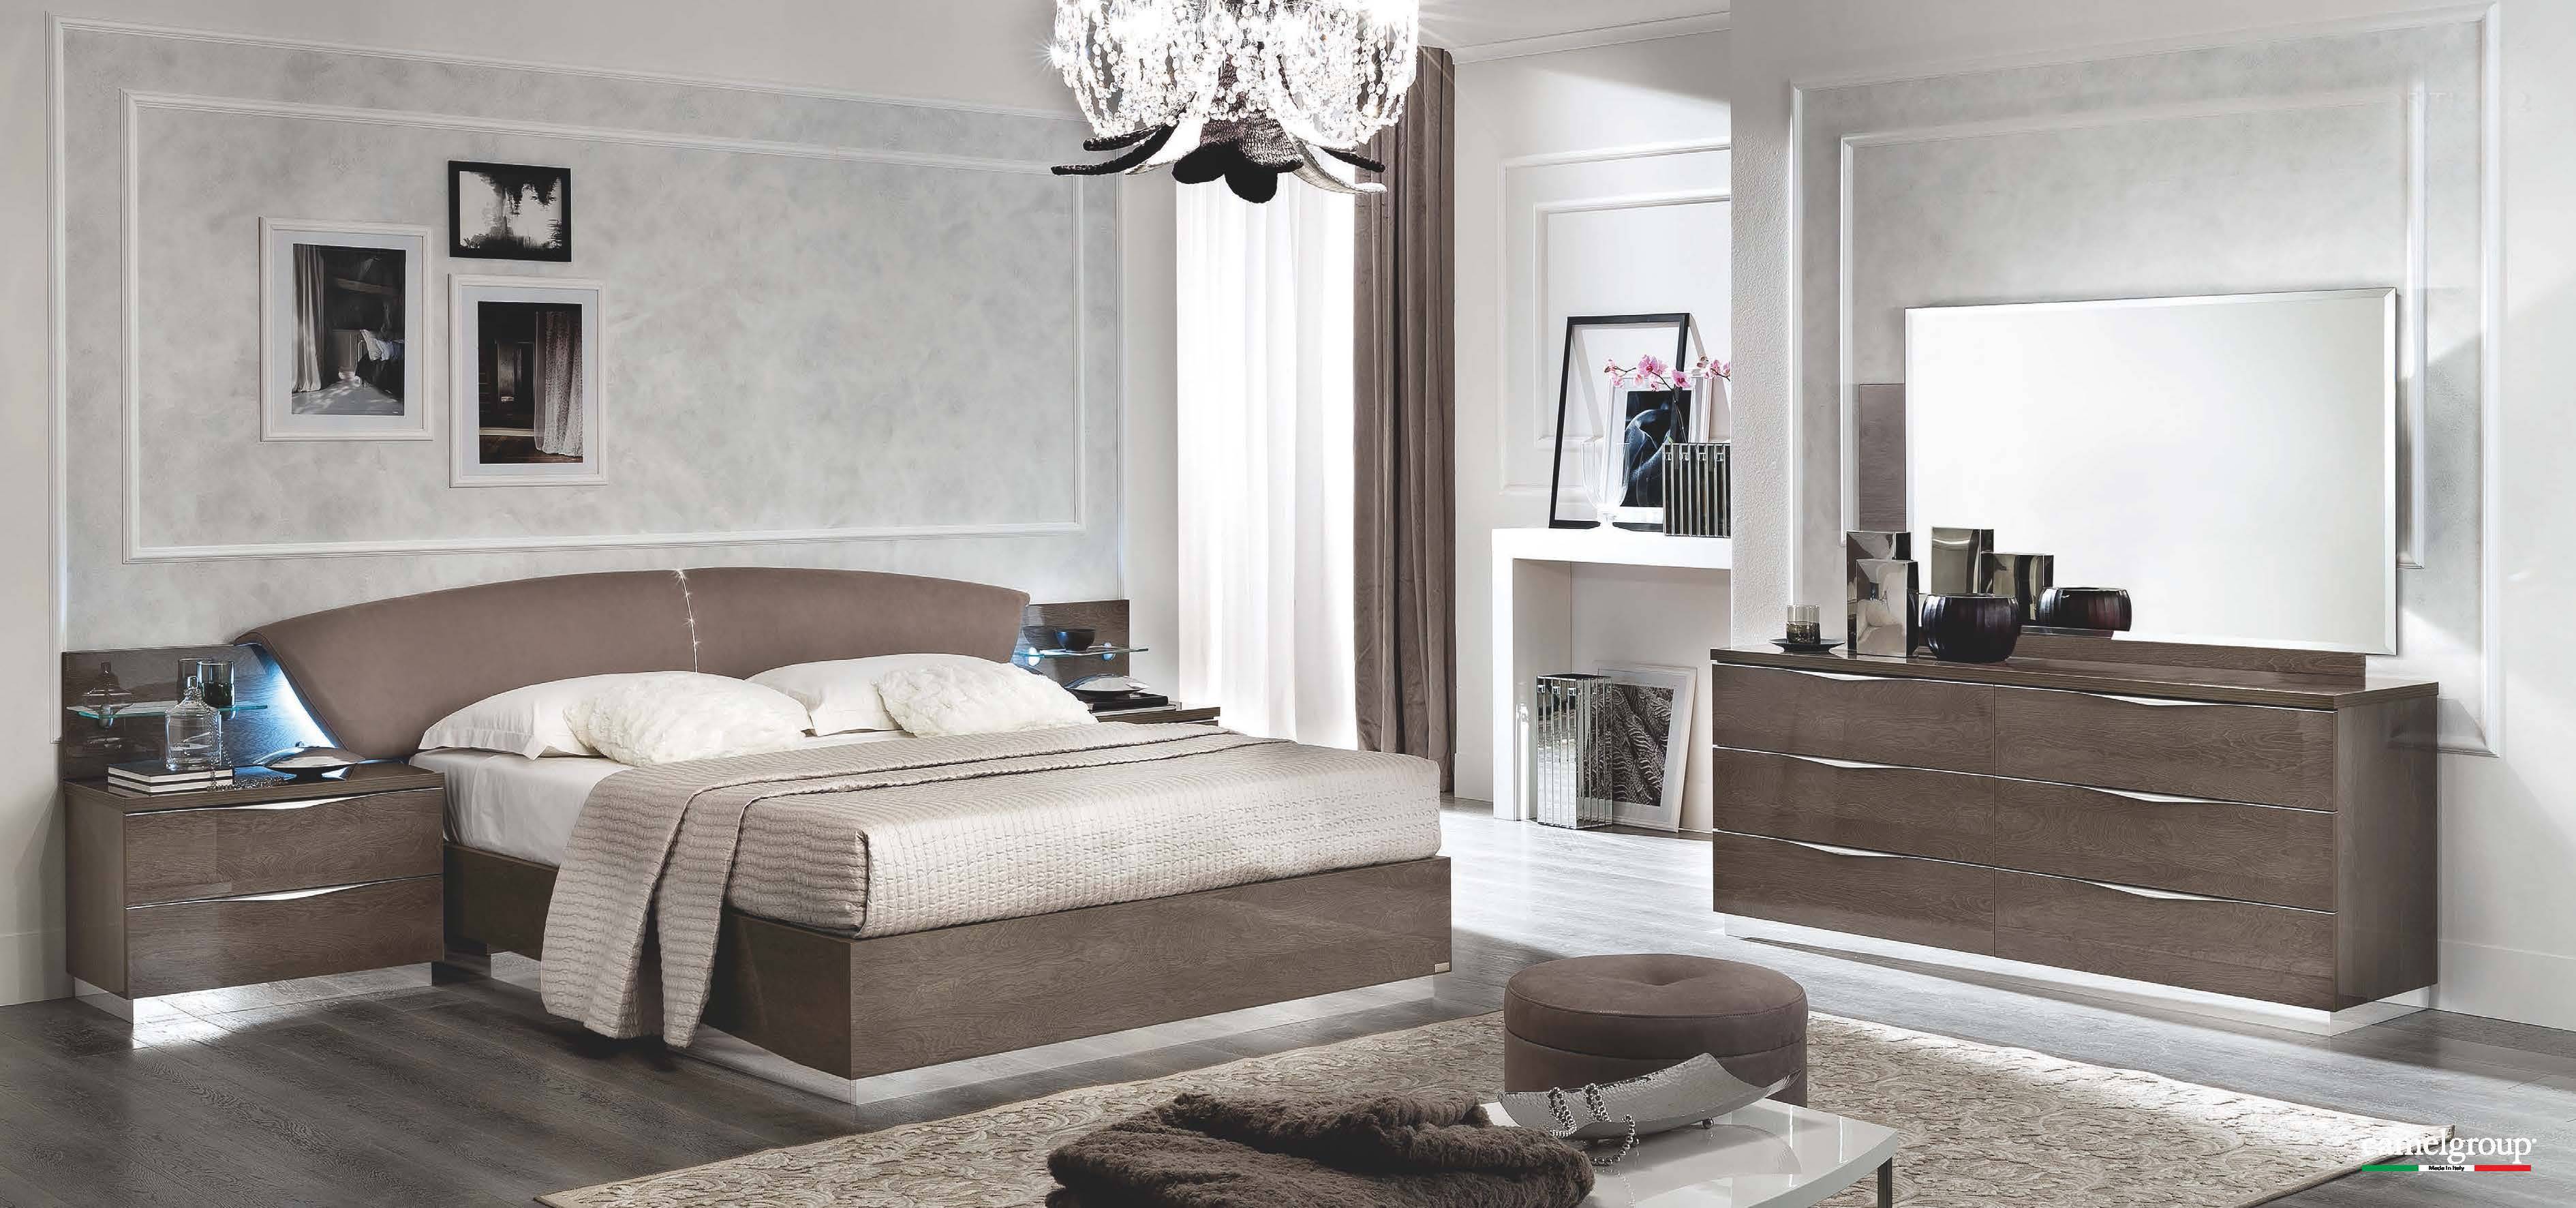 made in italy bedroom furniture